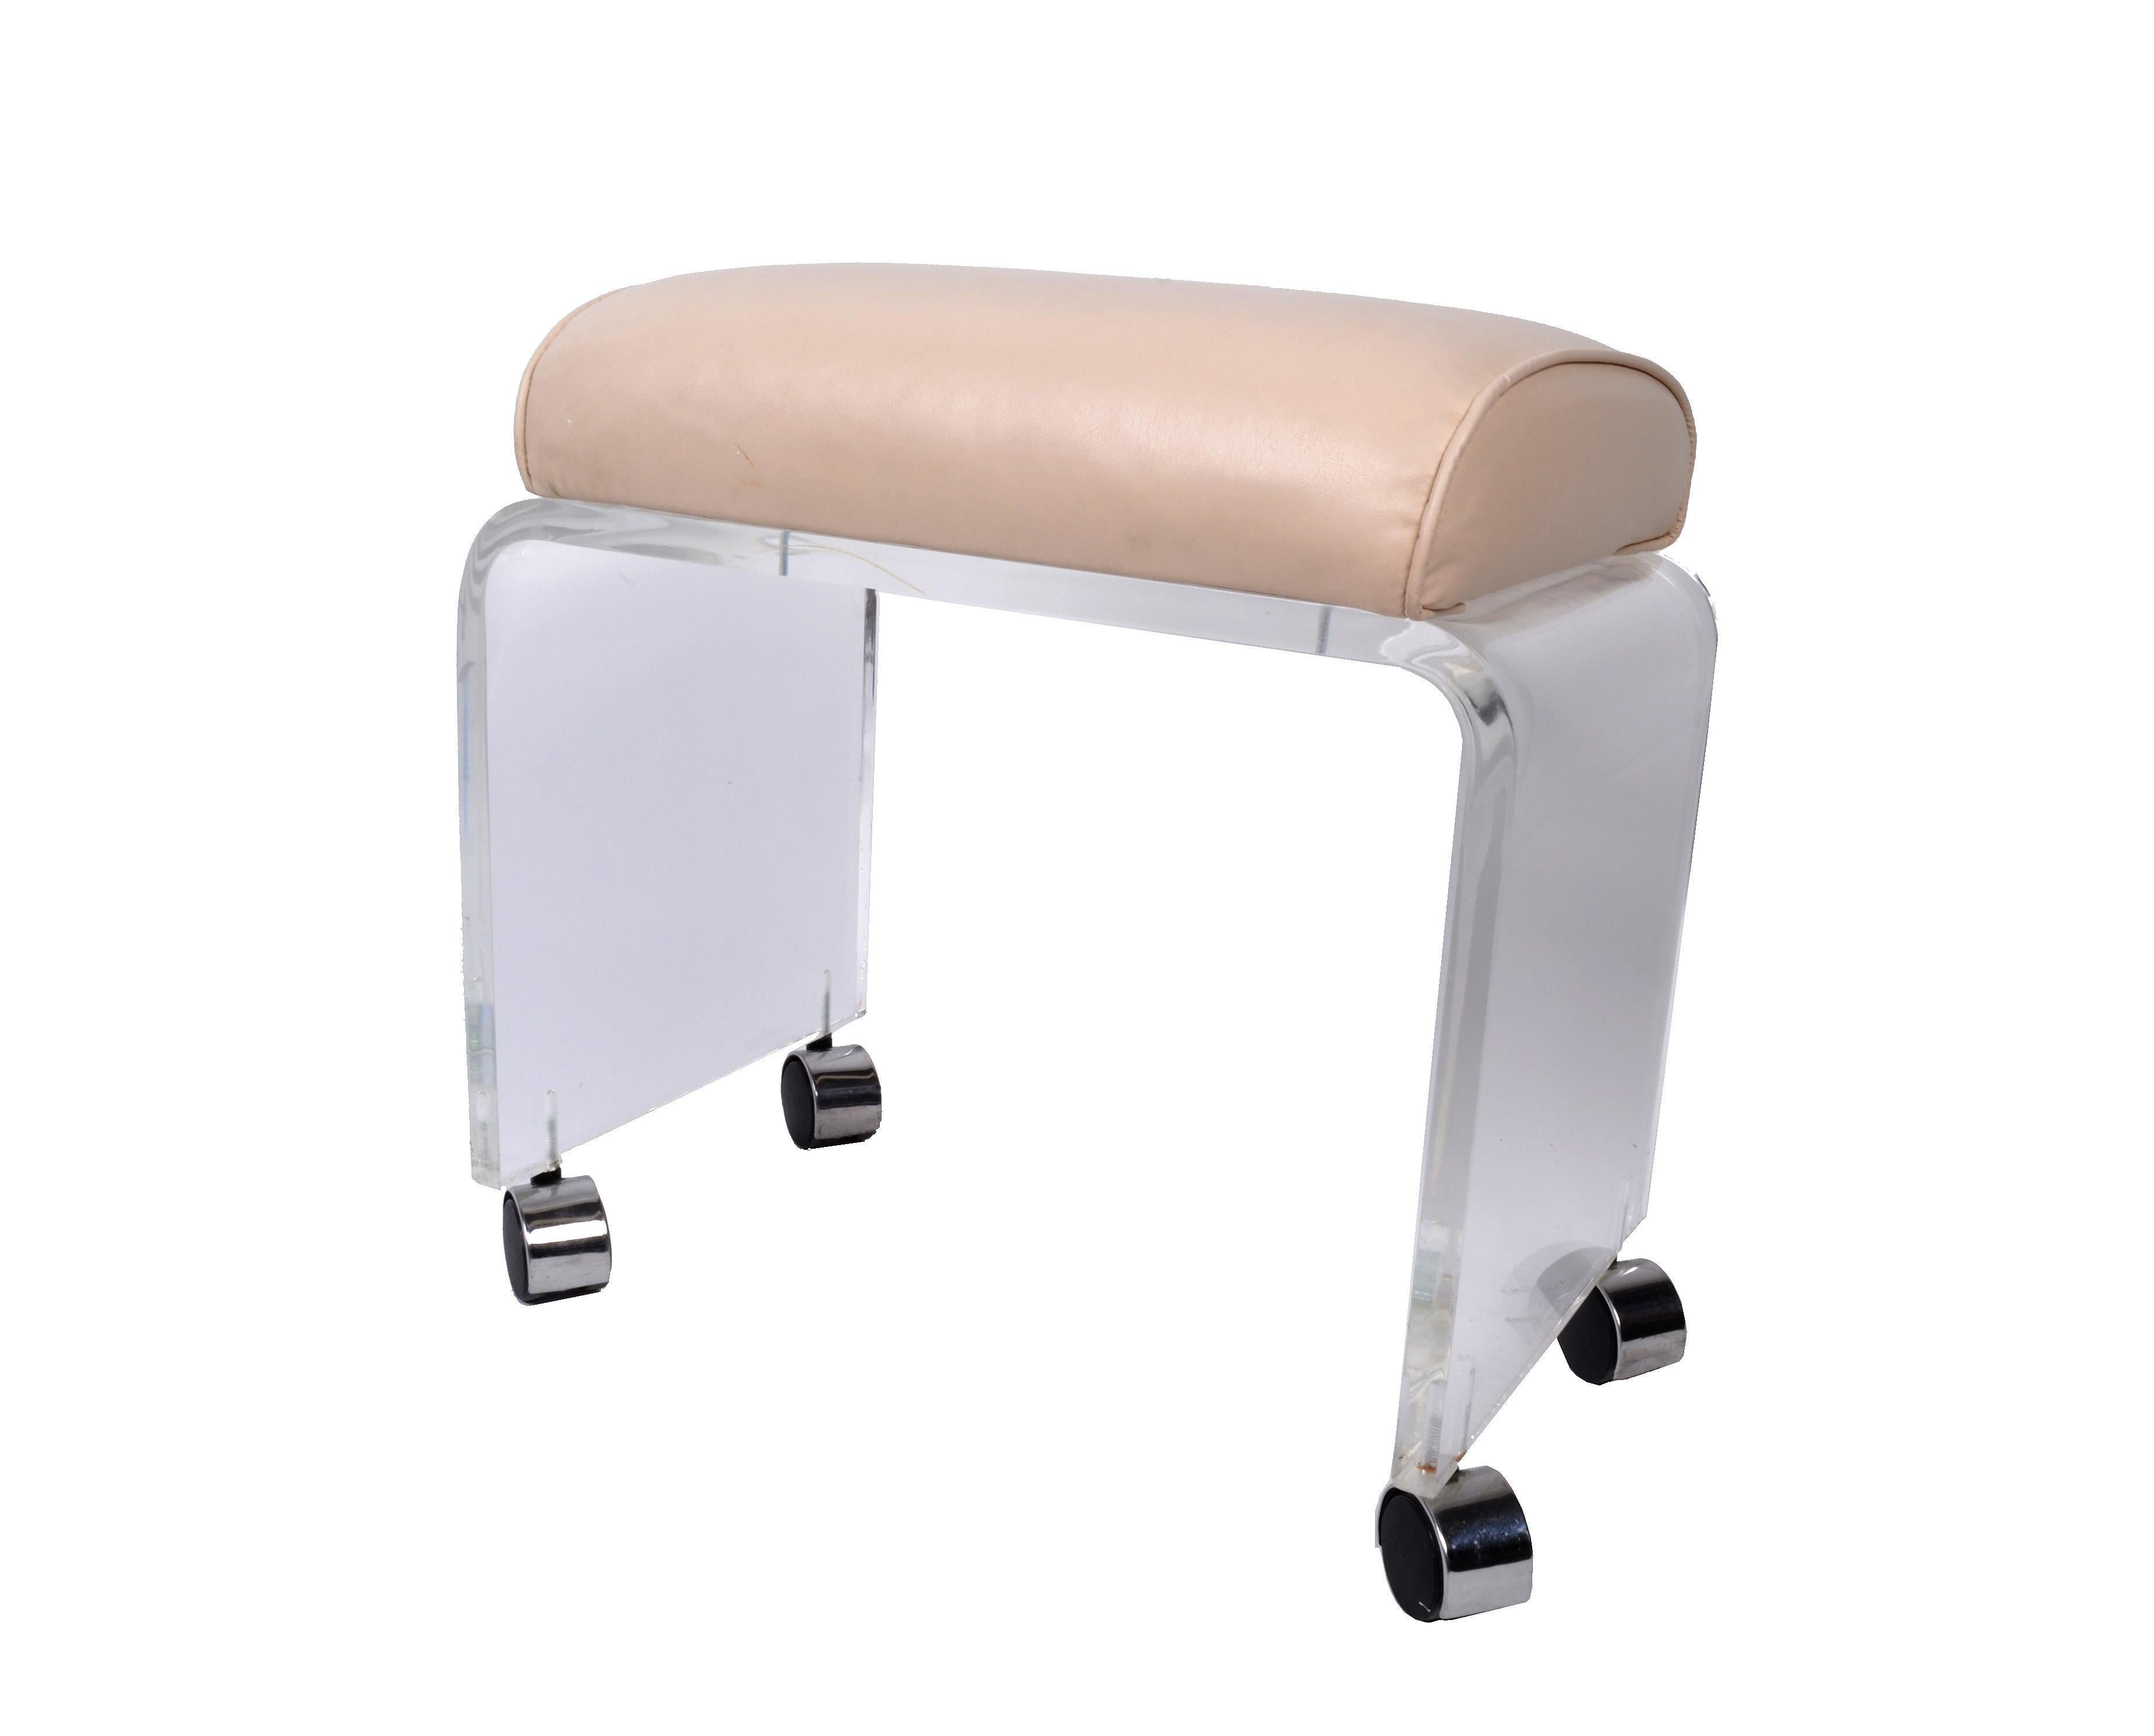 Classic Lucite stool on casters with a light brown vinyl upholstery.
Can be used as vanity stool or whatever you need it for.
Fits in with any design and decor, simply lovely.